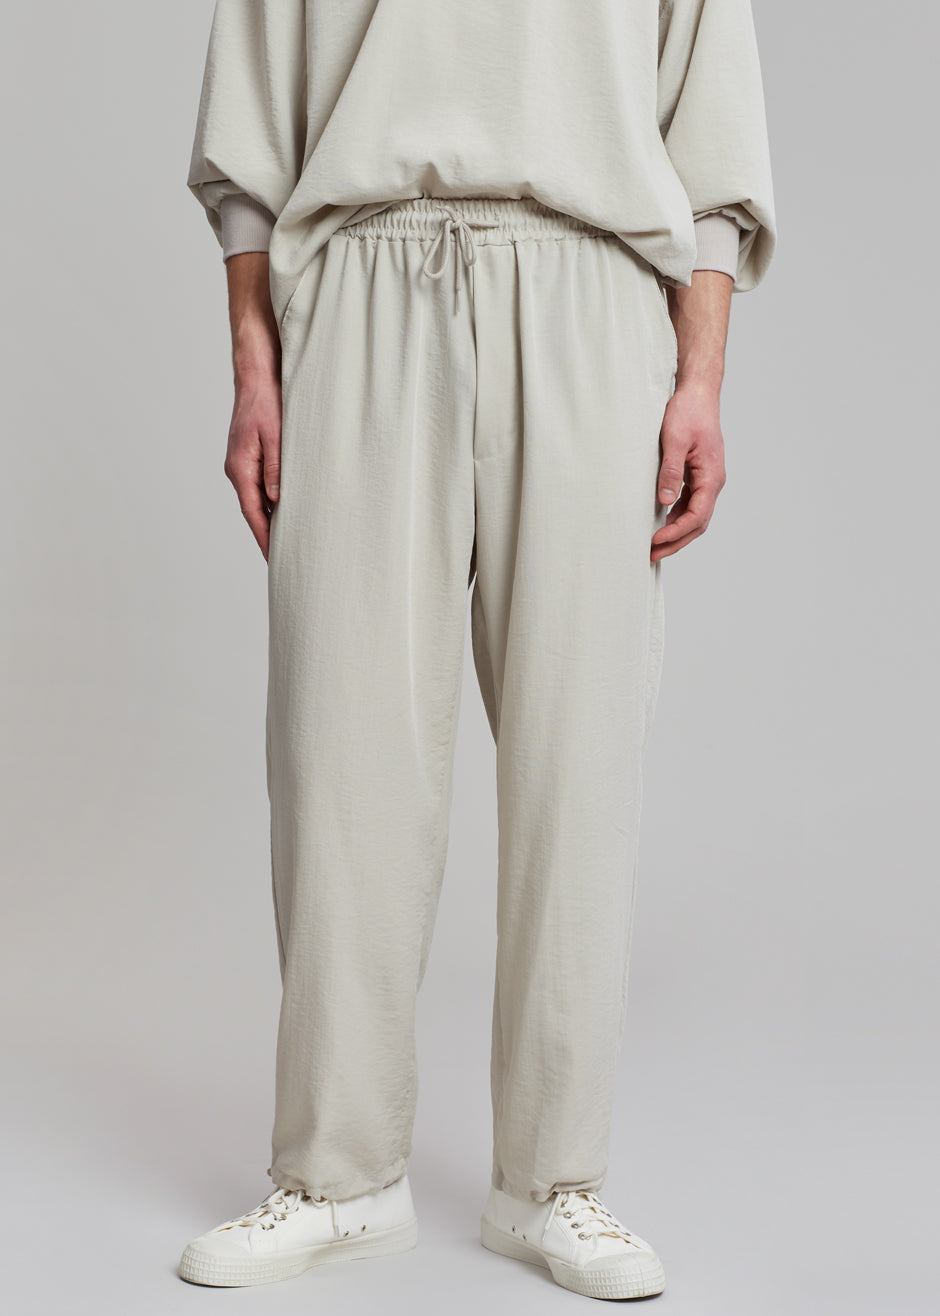 Geoff String Jogger - Oyster - 1